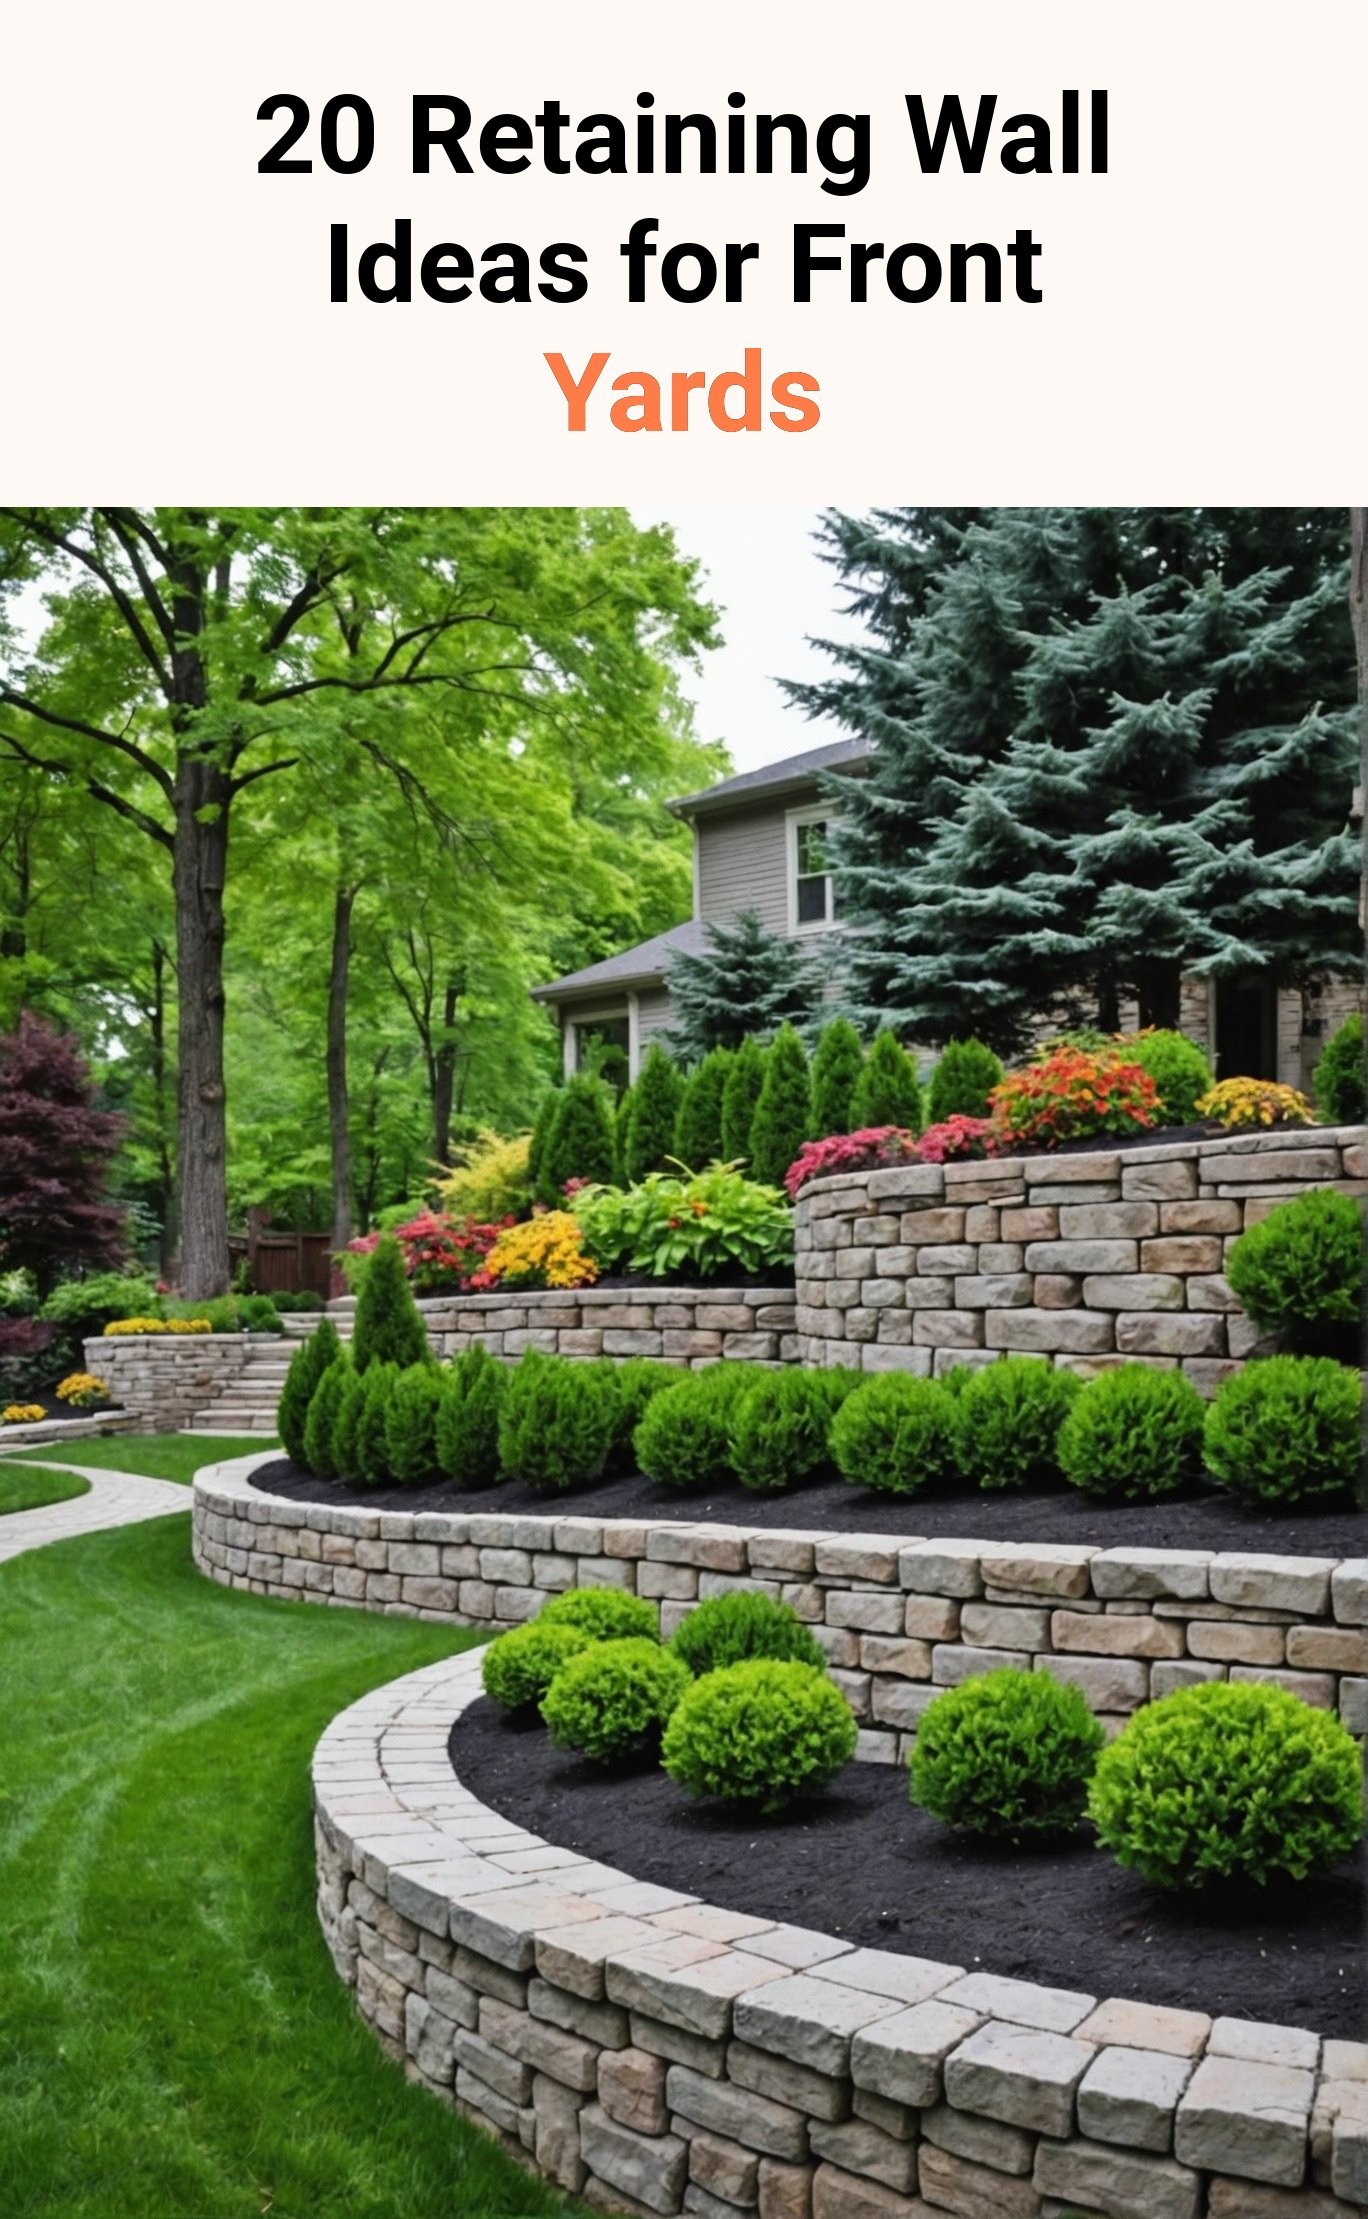 20 Retaining Wall Ideas for Front Yards